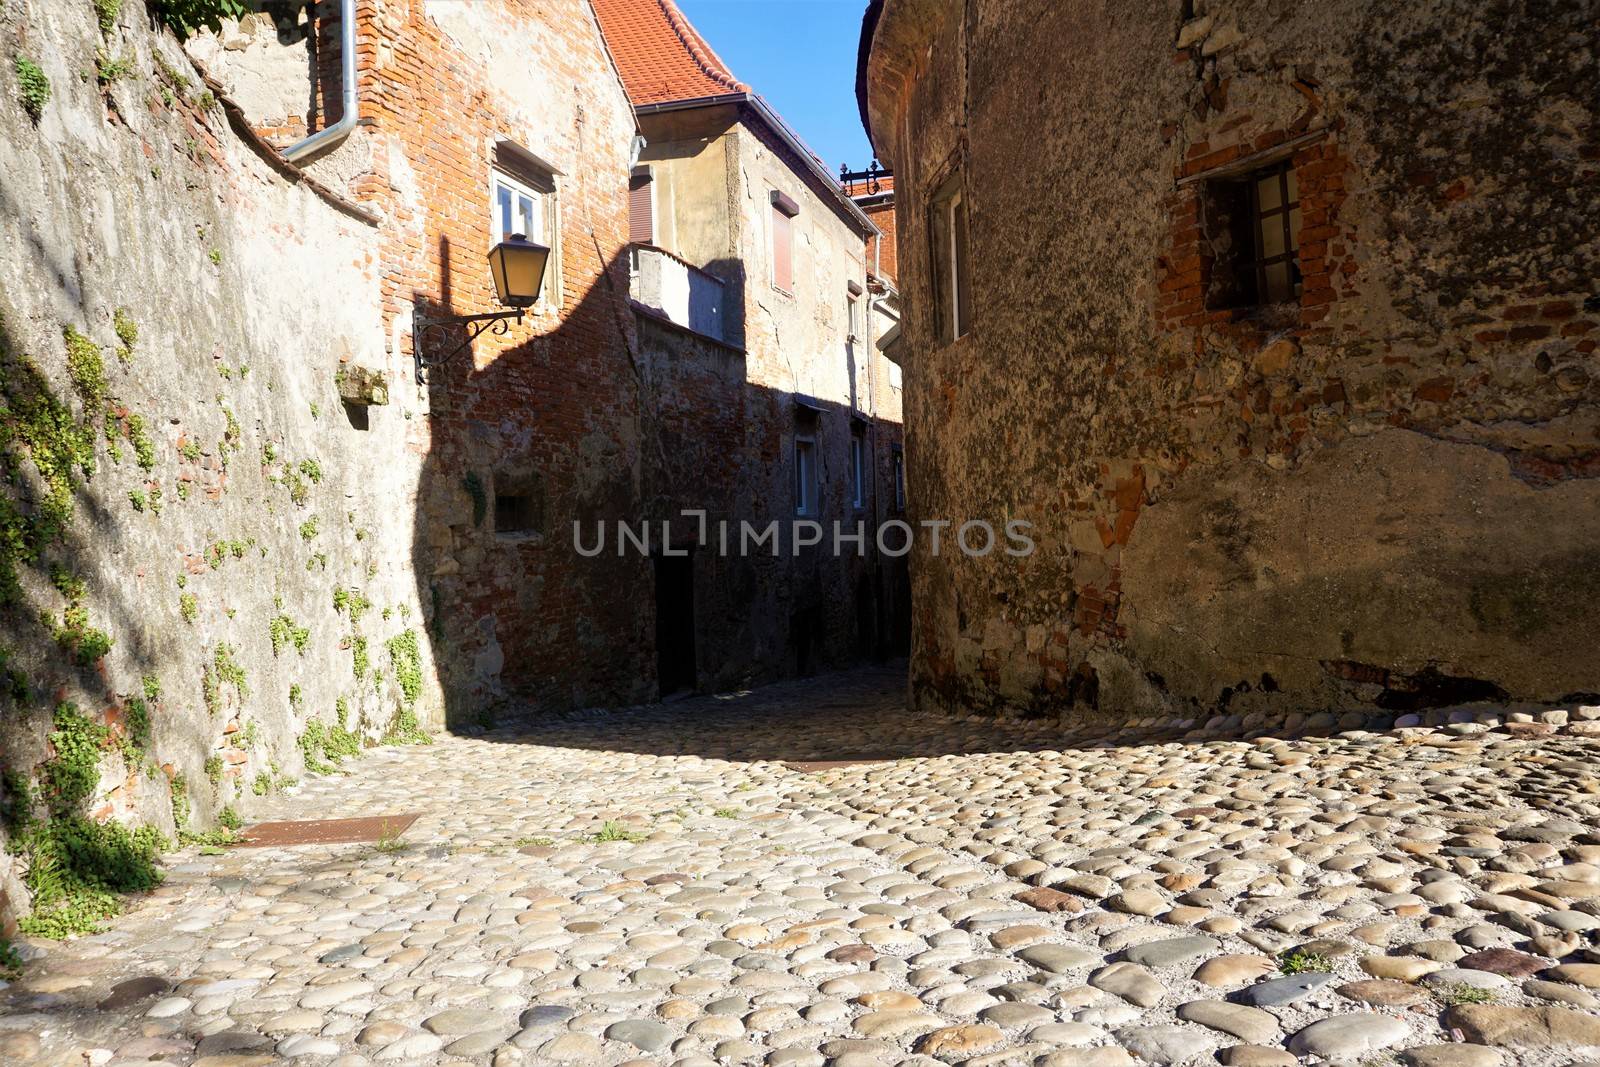 Narrow street in the old town of Ptuj by pisces2386